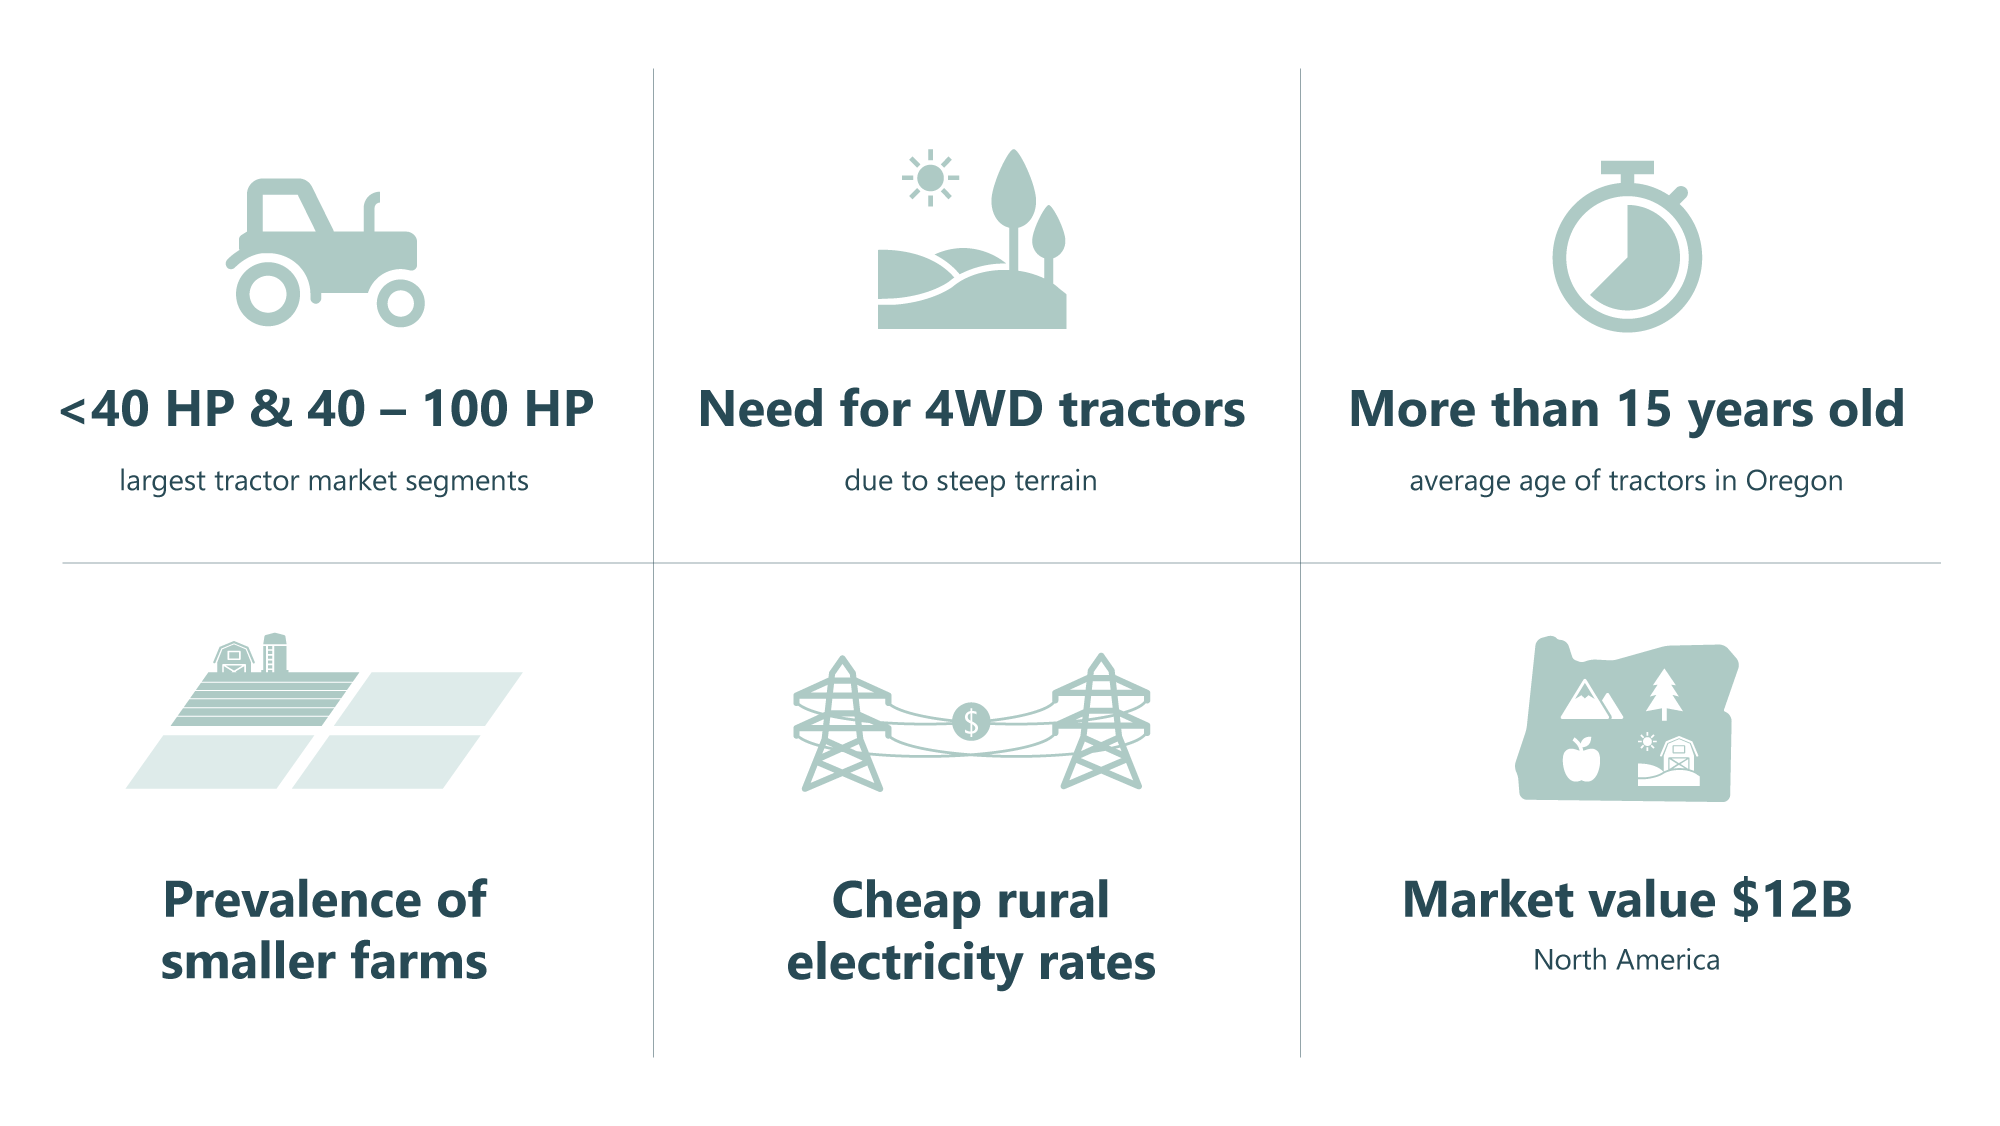 Electric Tractor Industry in the Northwest: At a Glance